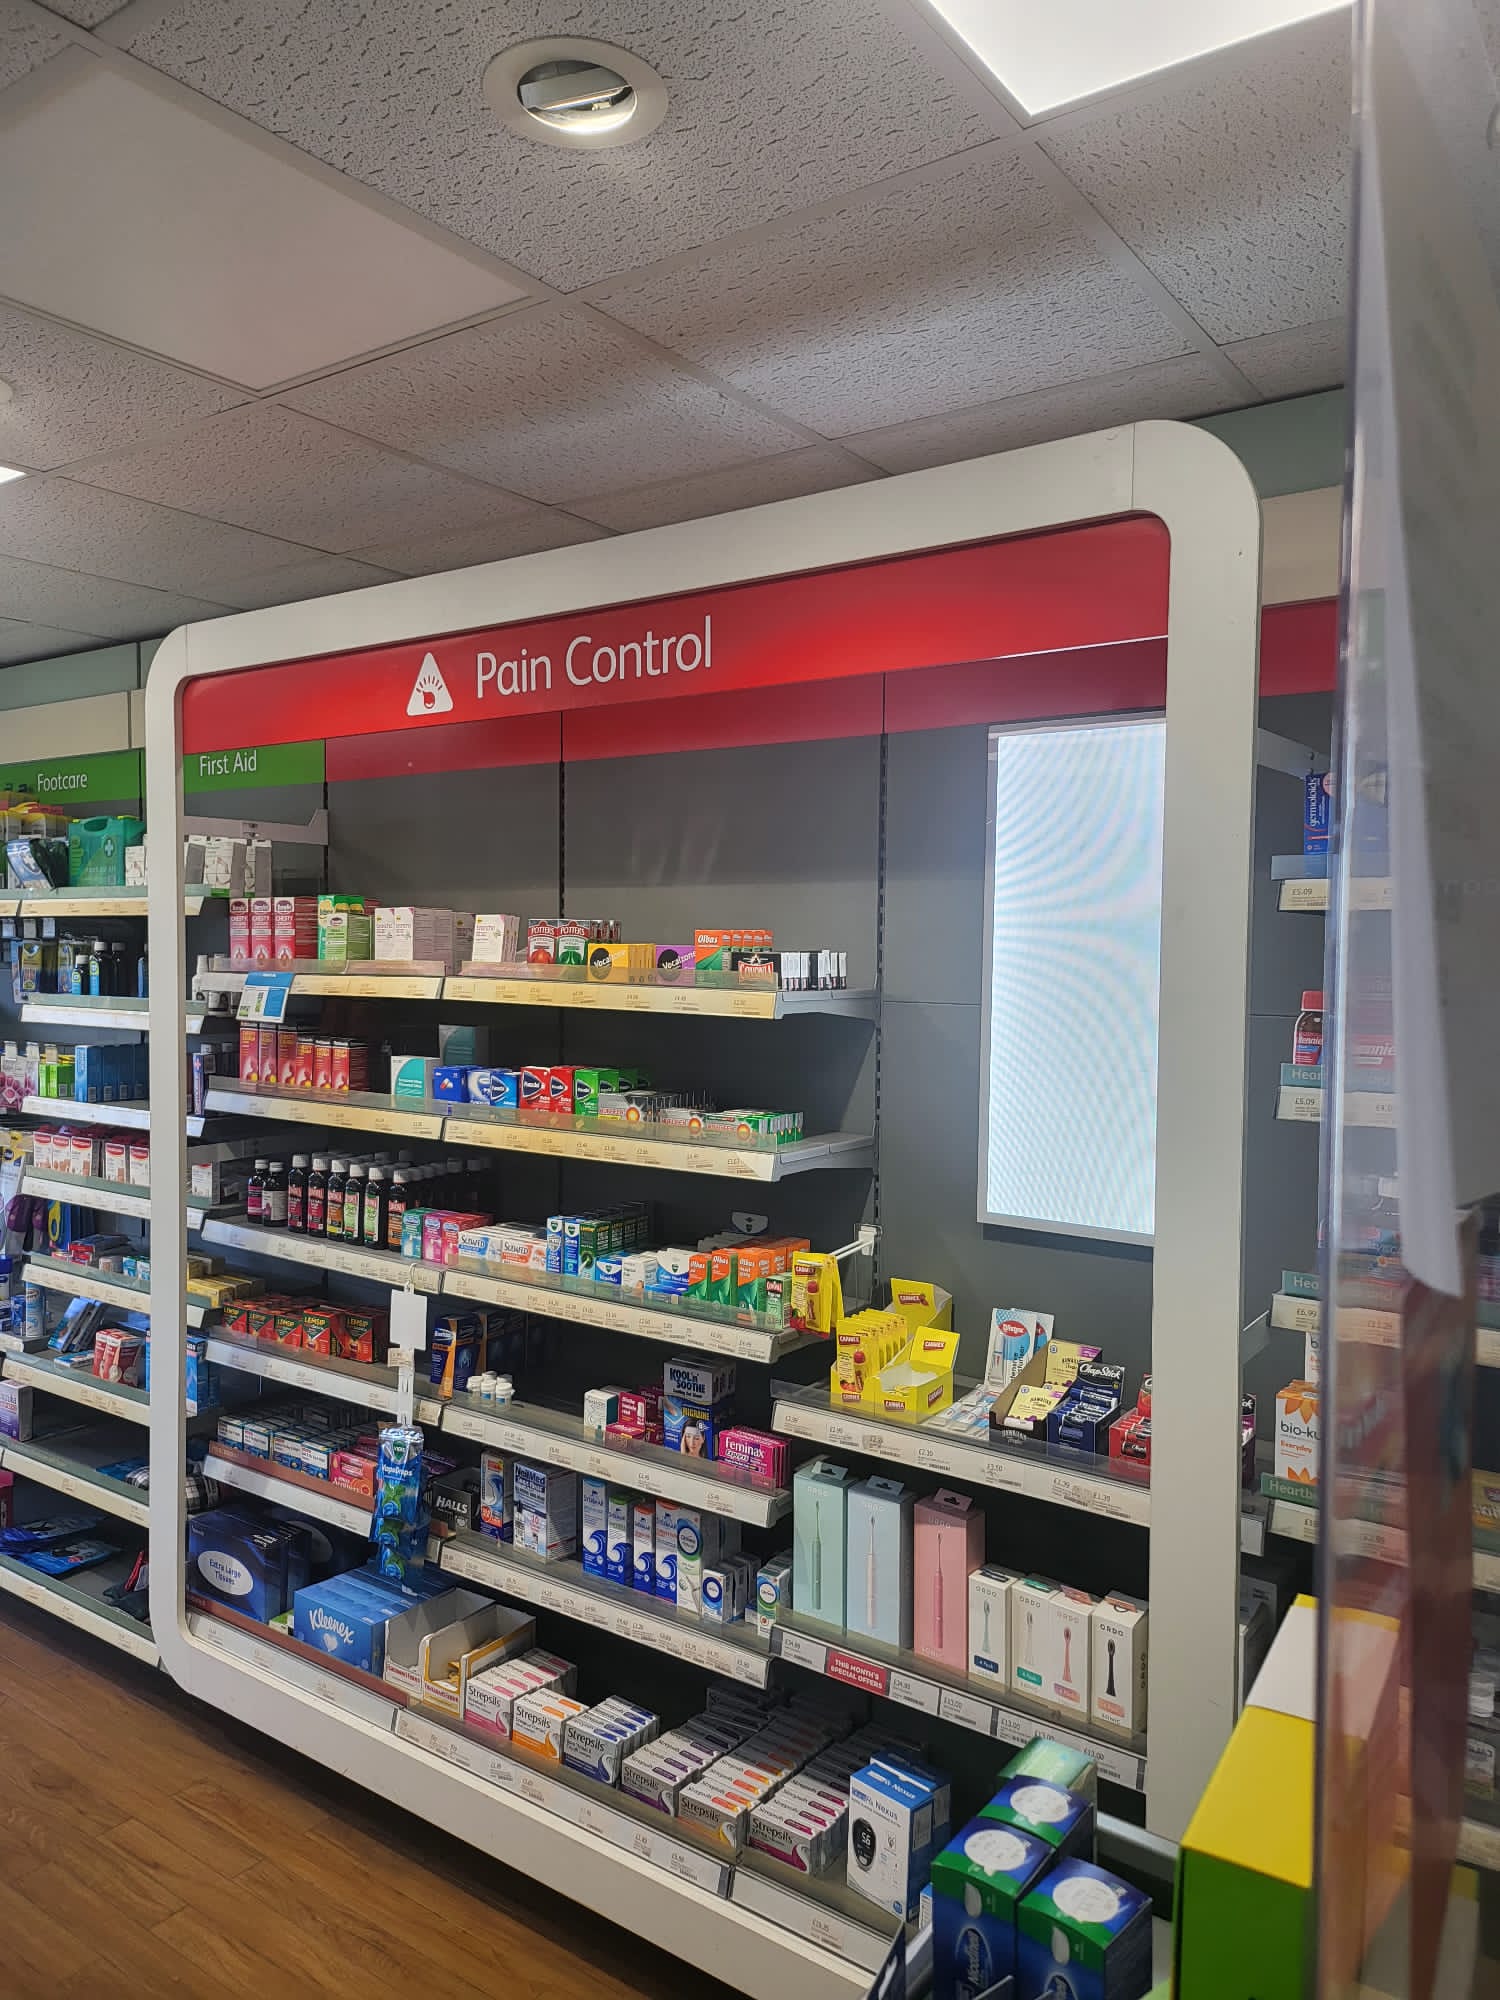 Inside Midsomer Pharmacy showing all the OTC medicines displayed on the shelves